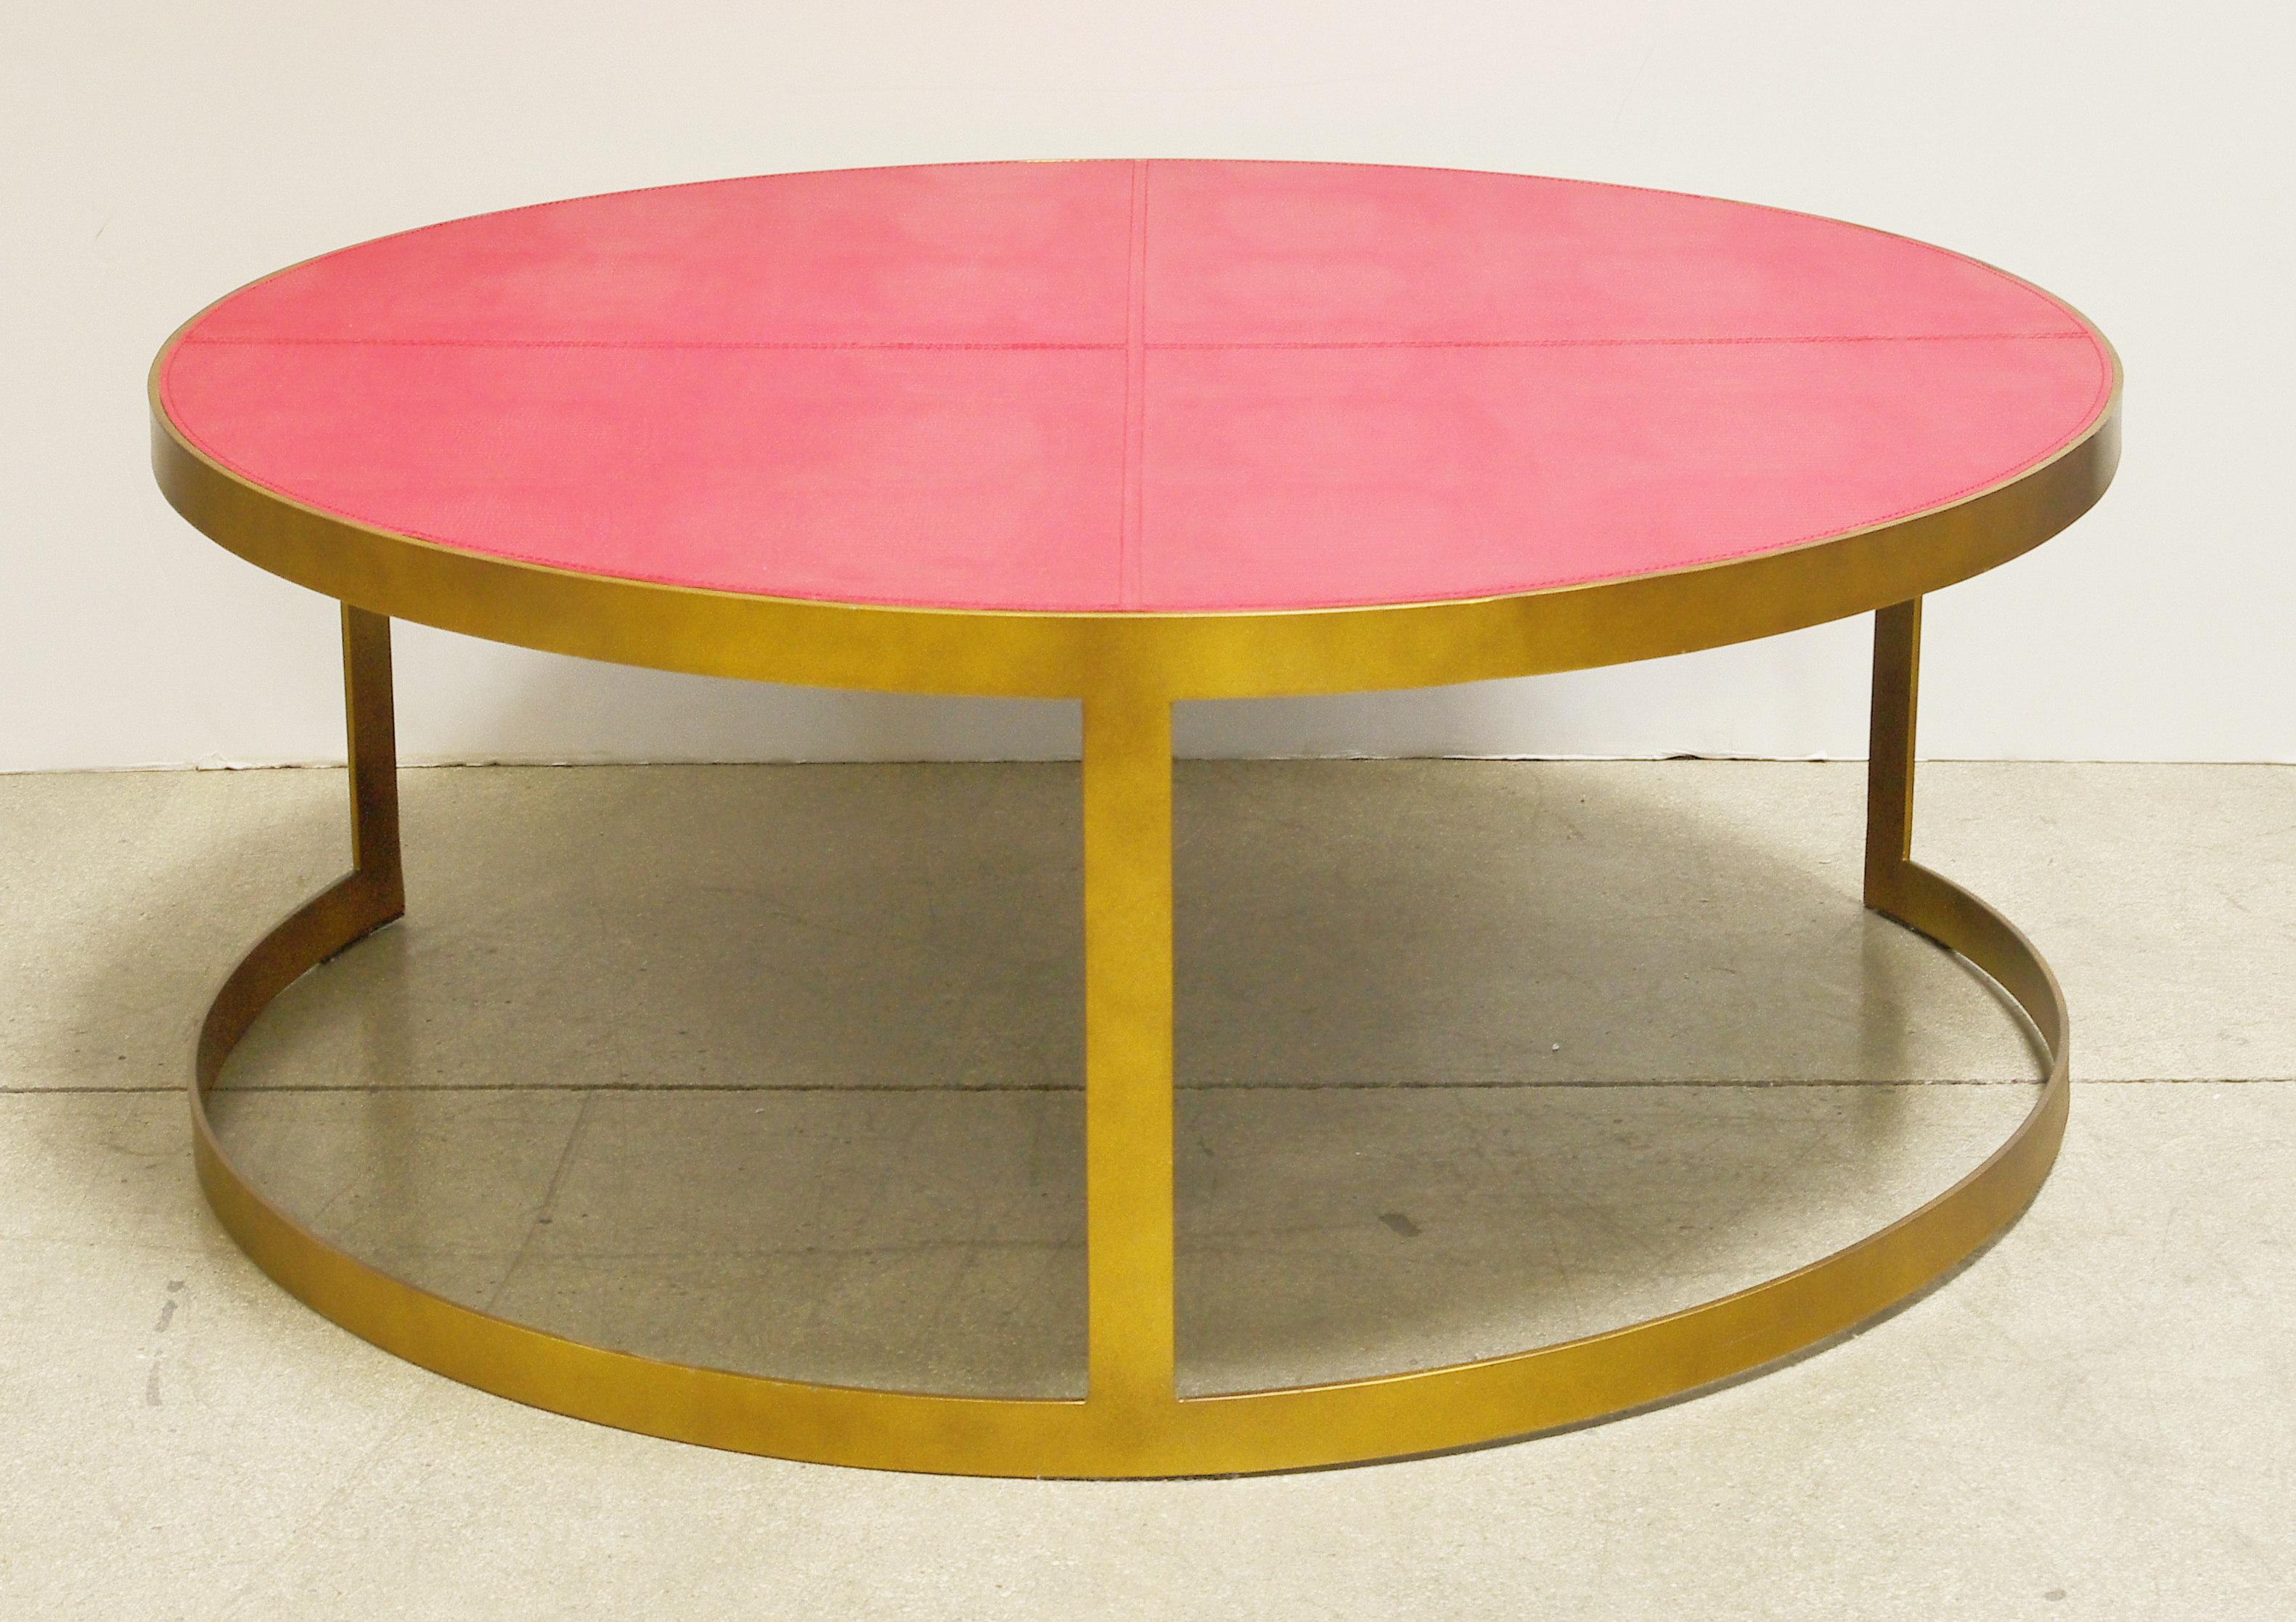 Pressed Red Leather Coffee Table by Fabio Ltd FINAL CLEARANCE SALE 